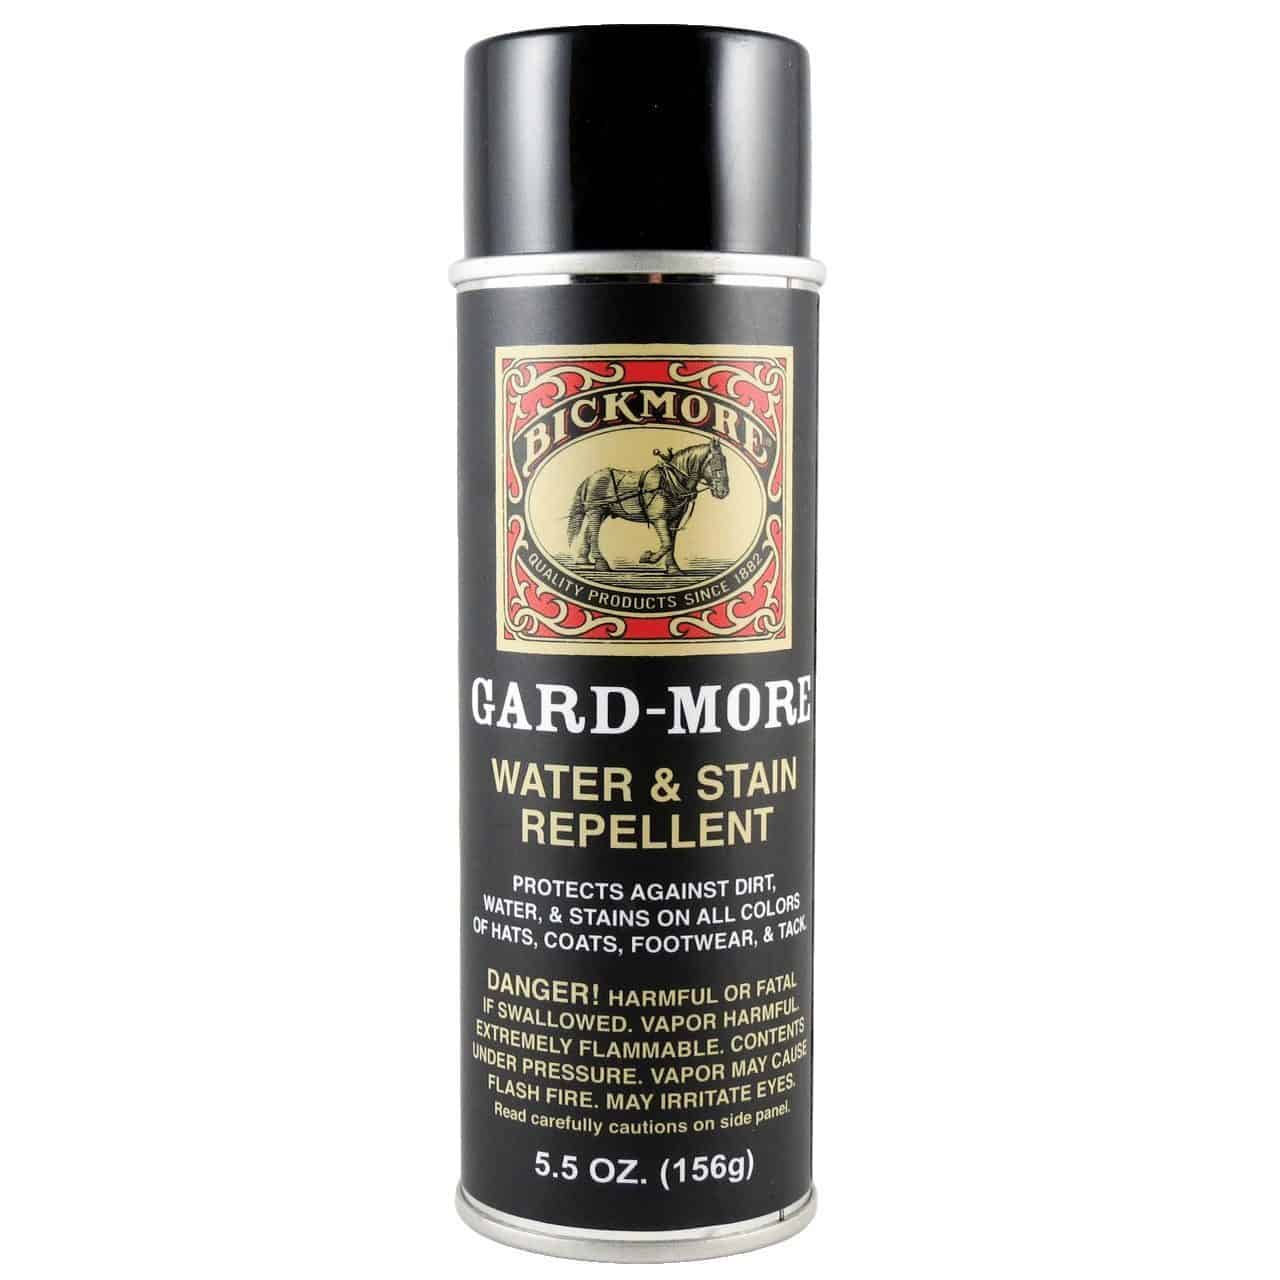 Bickmore Gard-More Water & Stain Repellant (5.5 oz / 156g) - 9 for 9